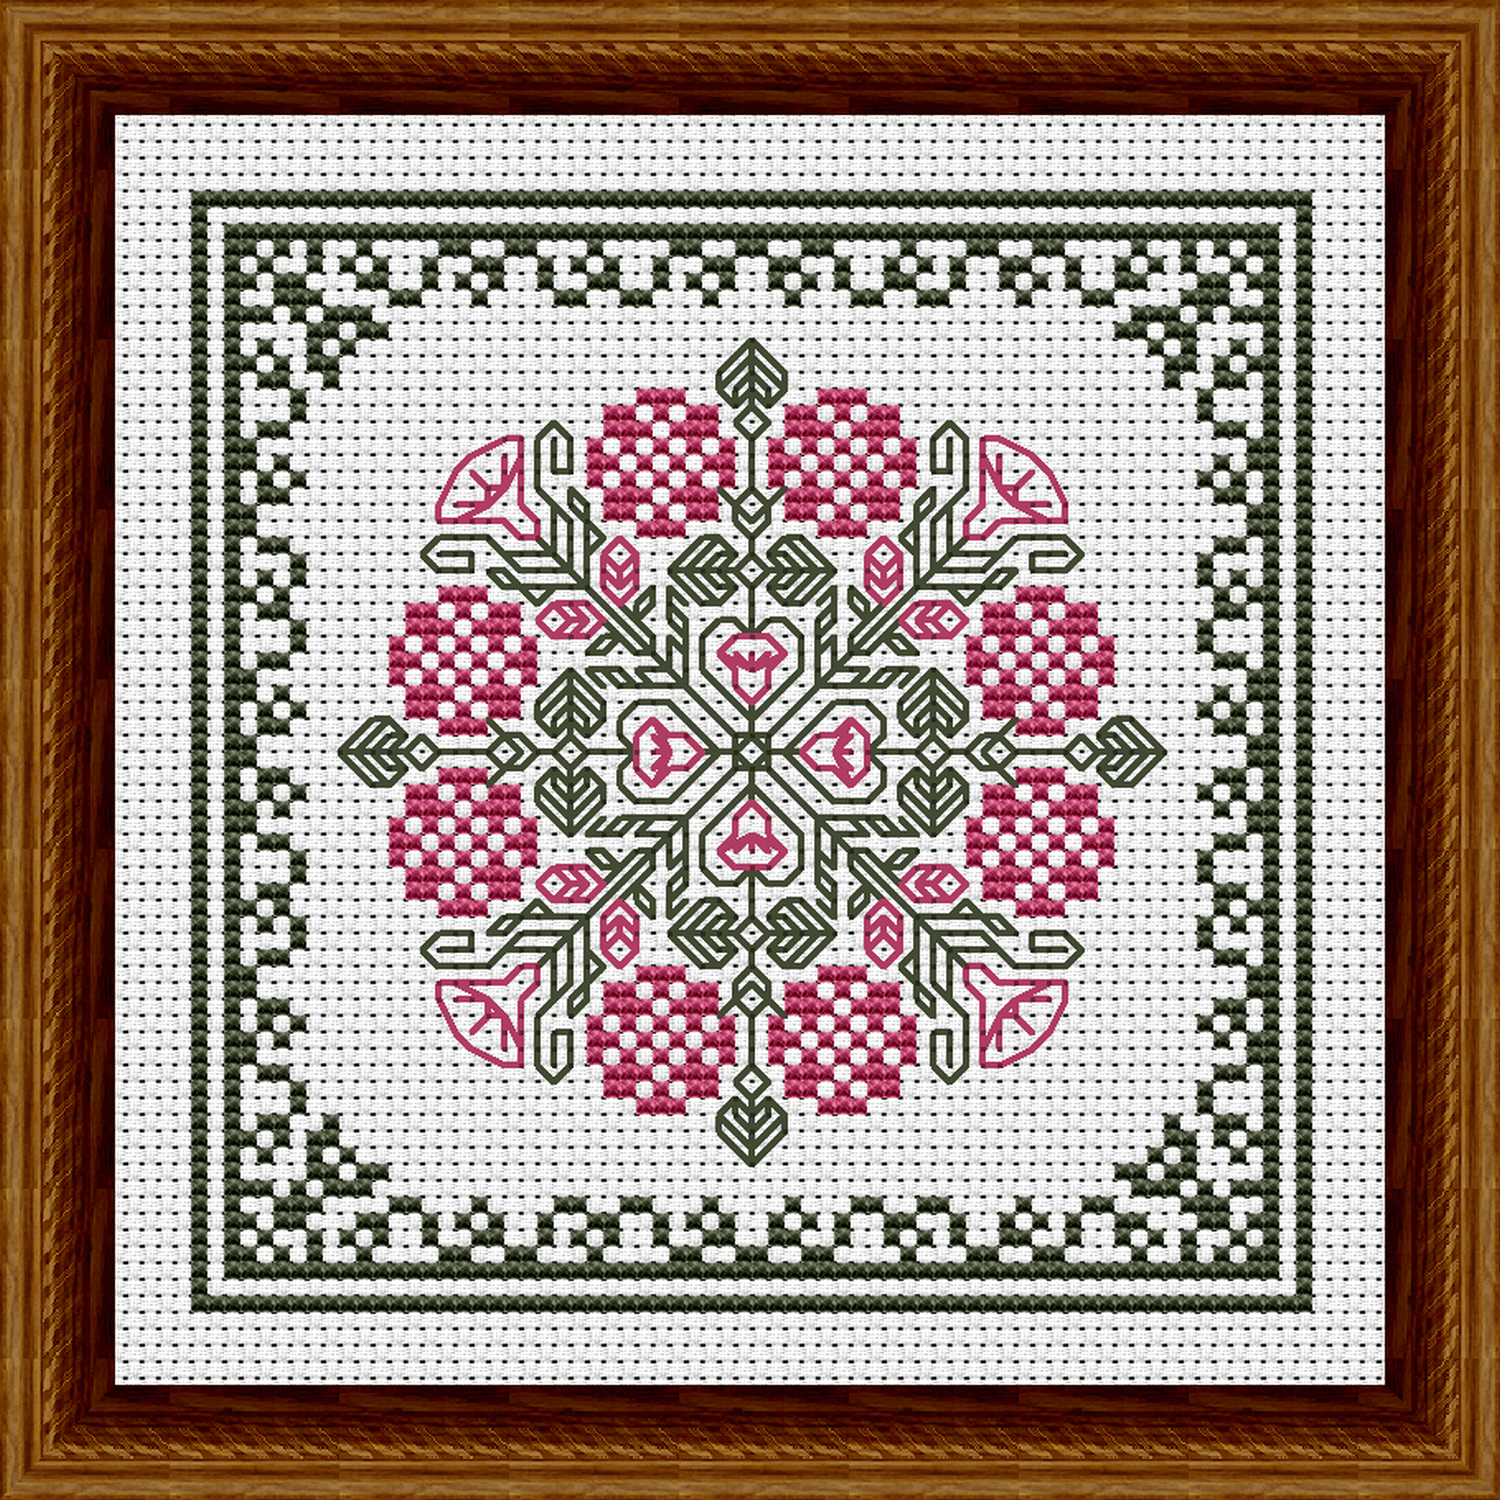 September Hearts Square with Morning Glories Cross Stitch Pattern 3508